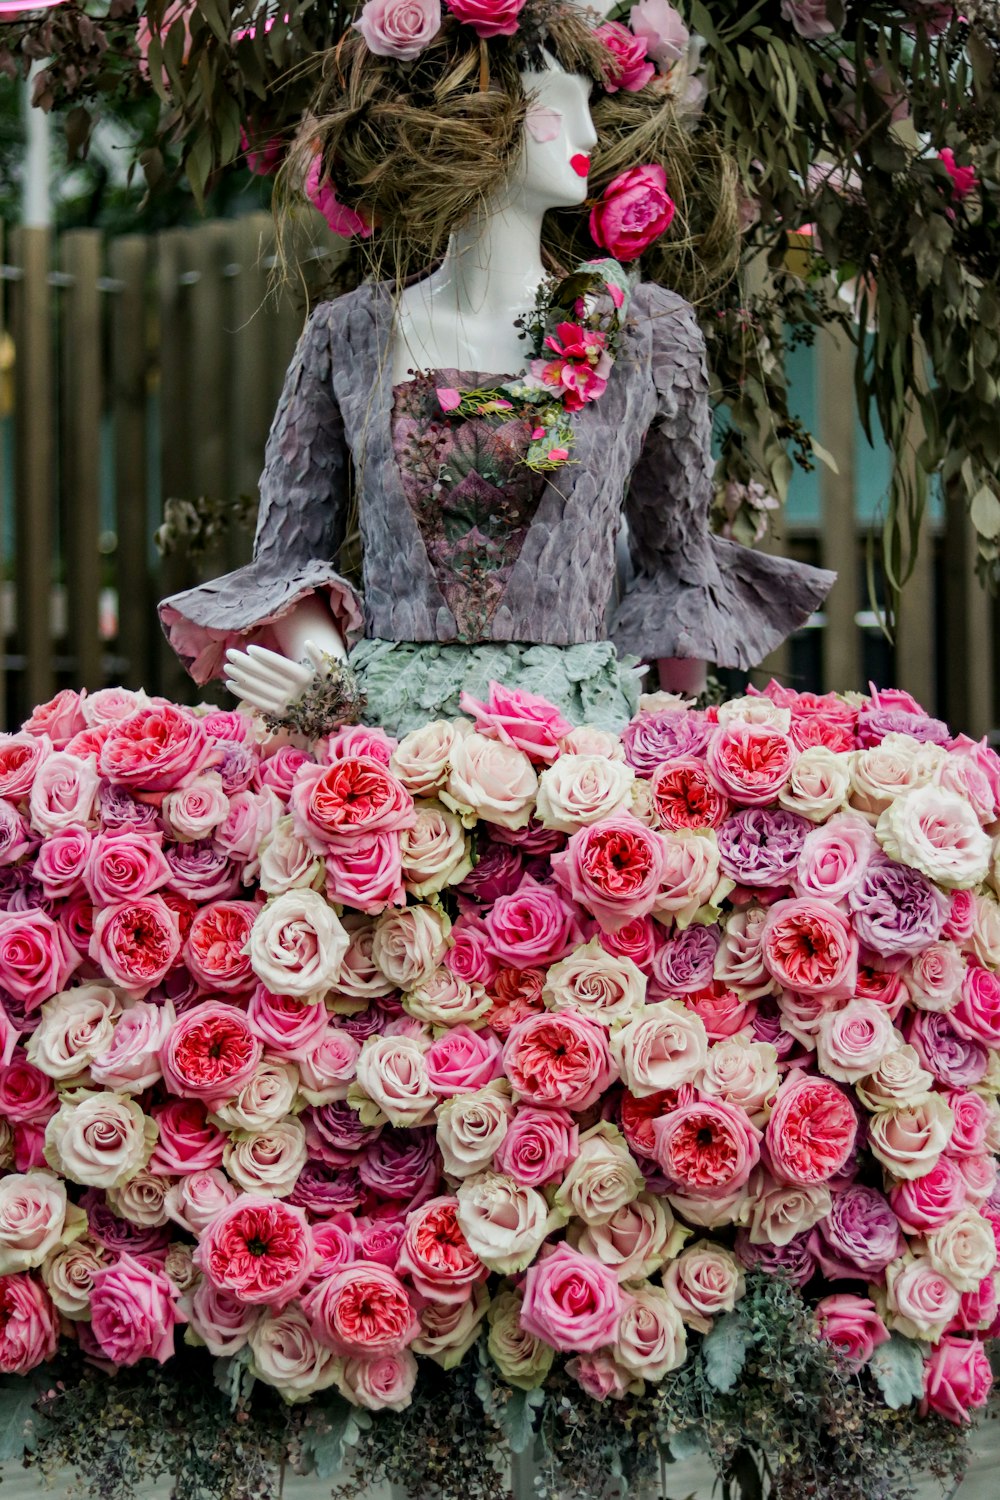 a mannequin dressed in a dress made out of flowers